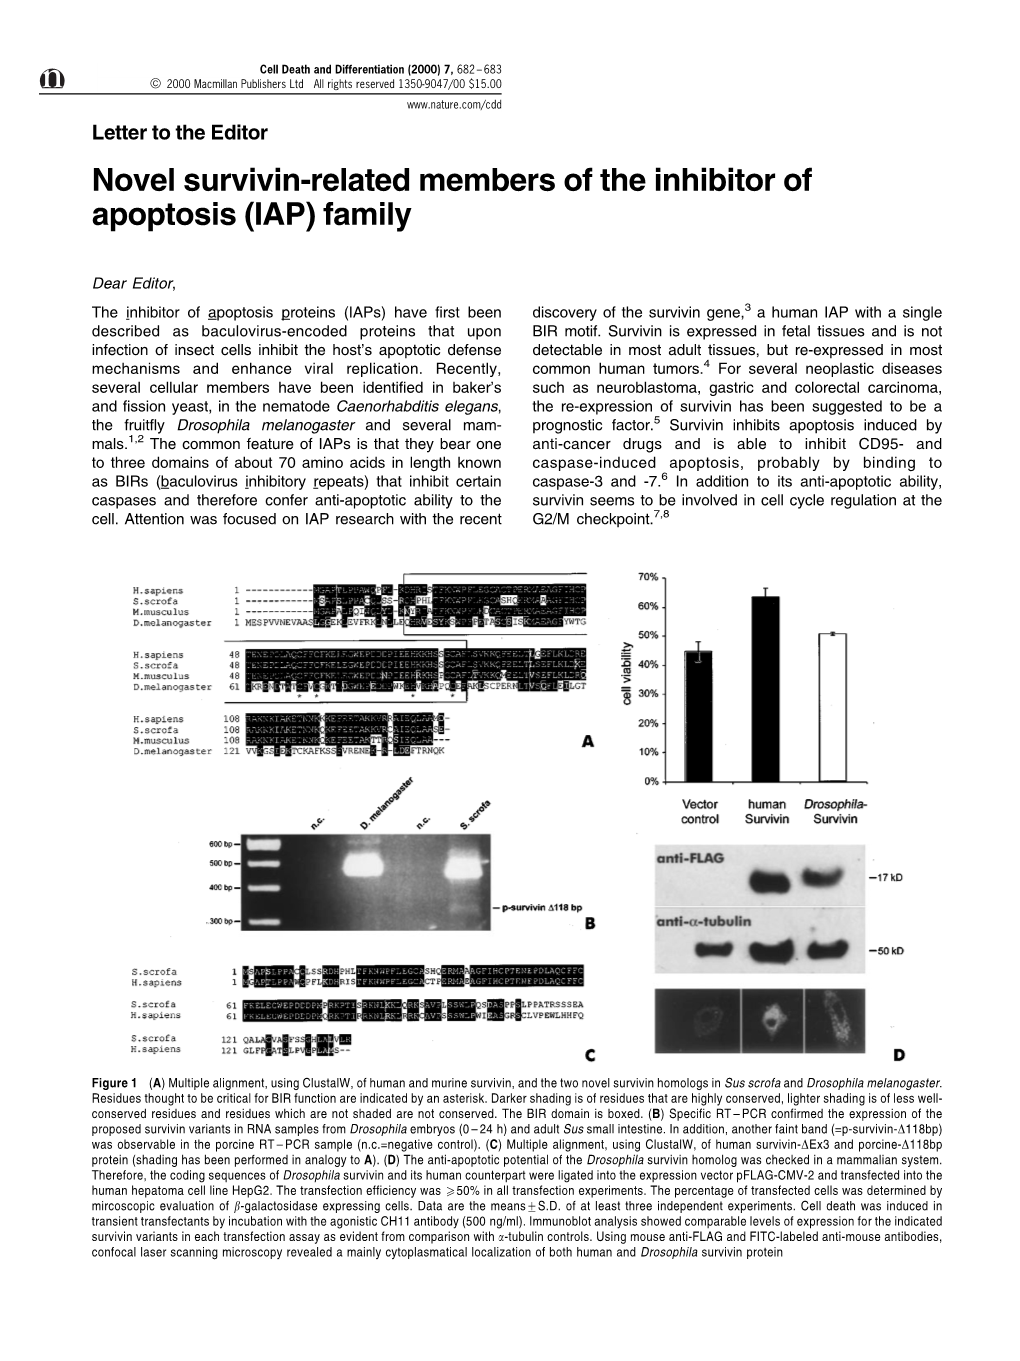 Novel Survivin-Related Members of the Inhibitor of Apoptosis (IAP) Family